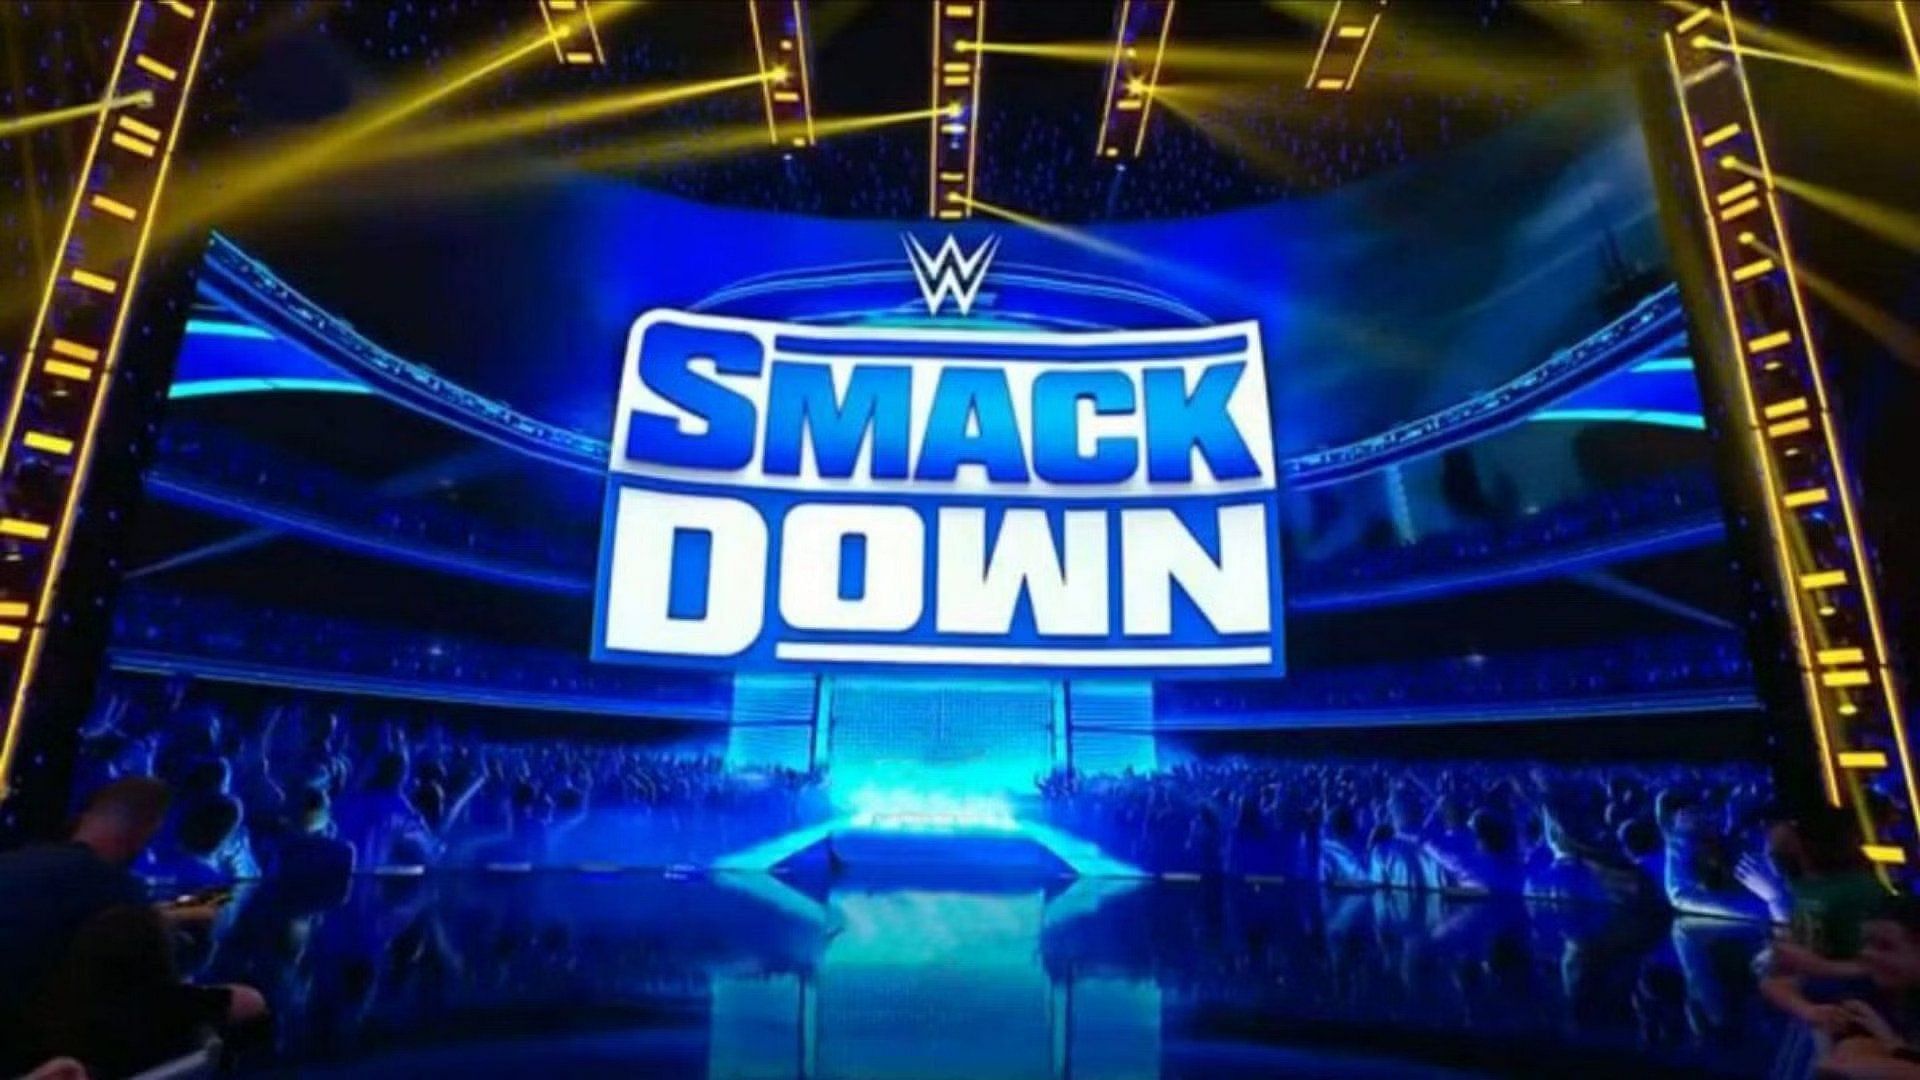 WWE SmackDown is set to be a loaded show tonight!